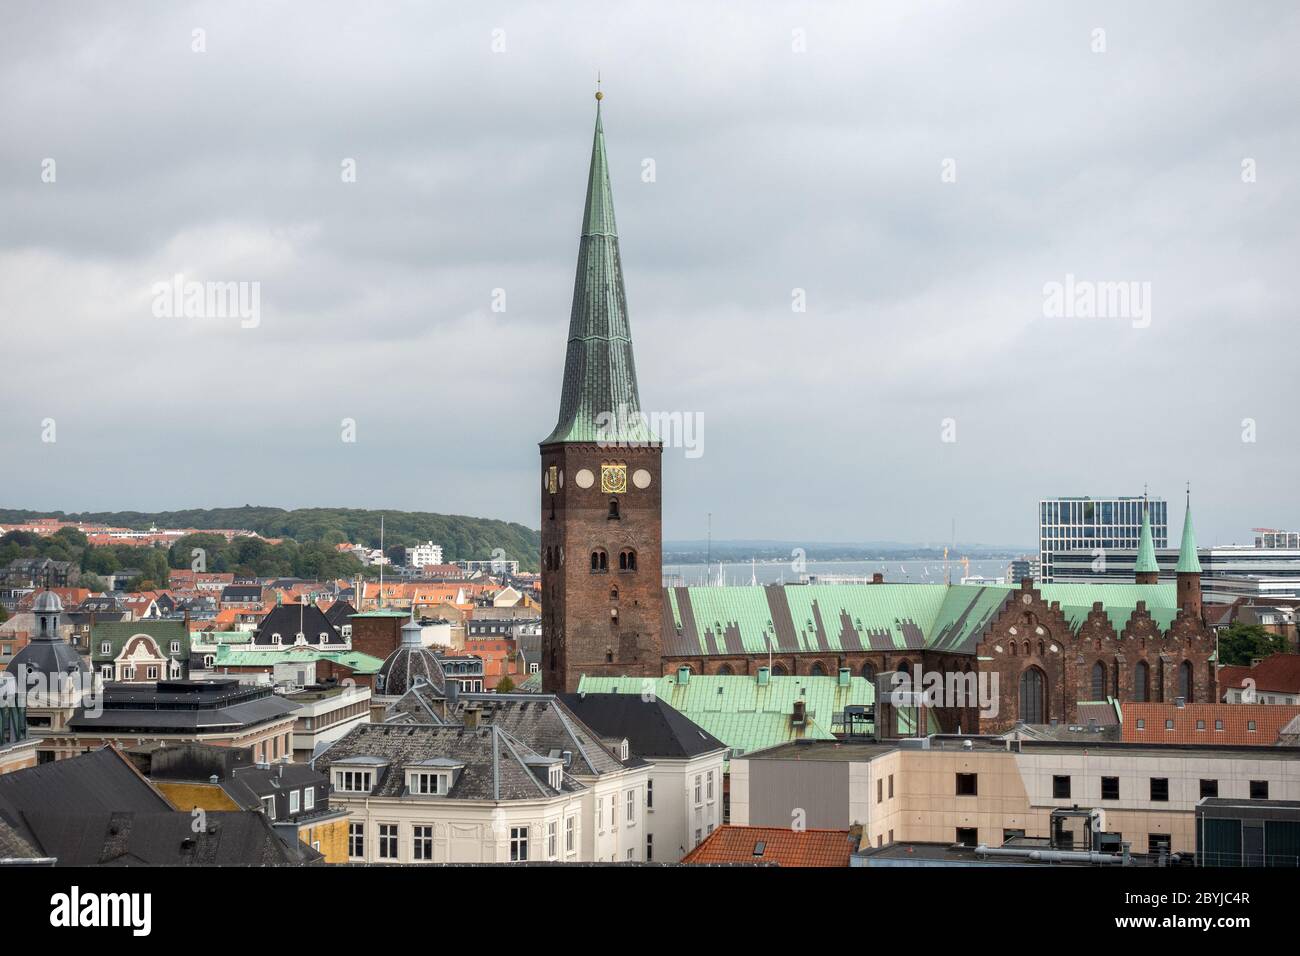 Aarhus Cathedral In The City Centre Of Aarhus Is The Tallest And Longest Church In Denmark Stock Photo